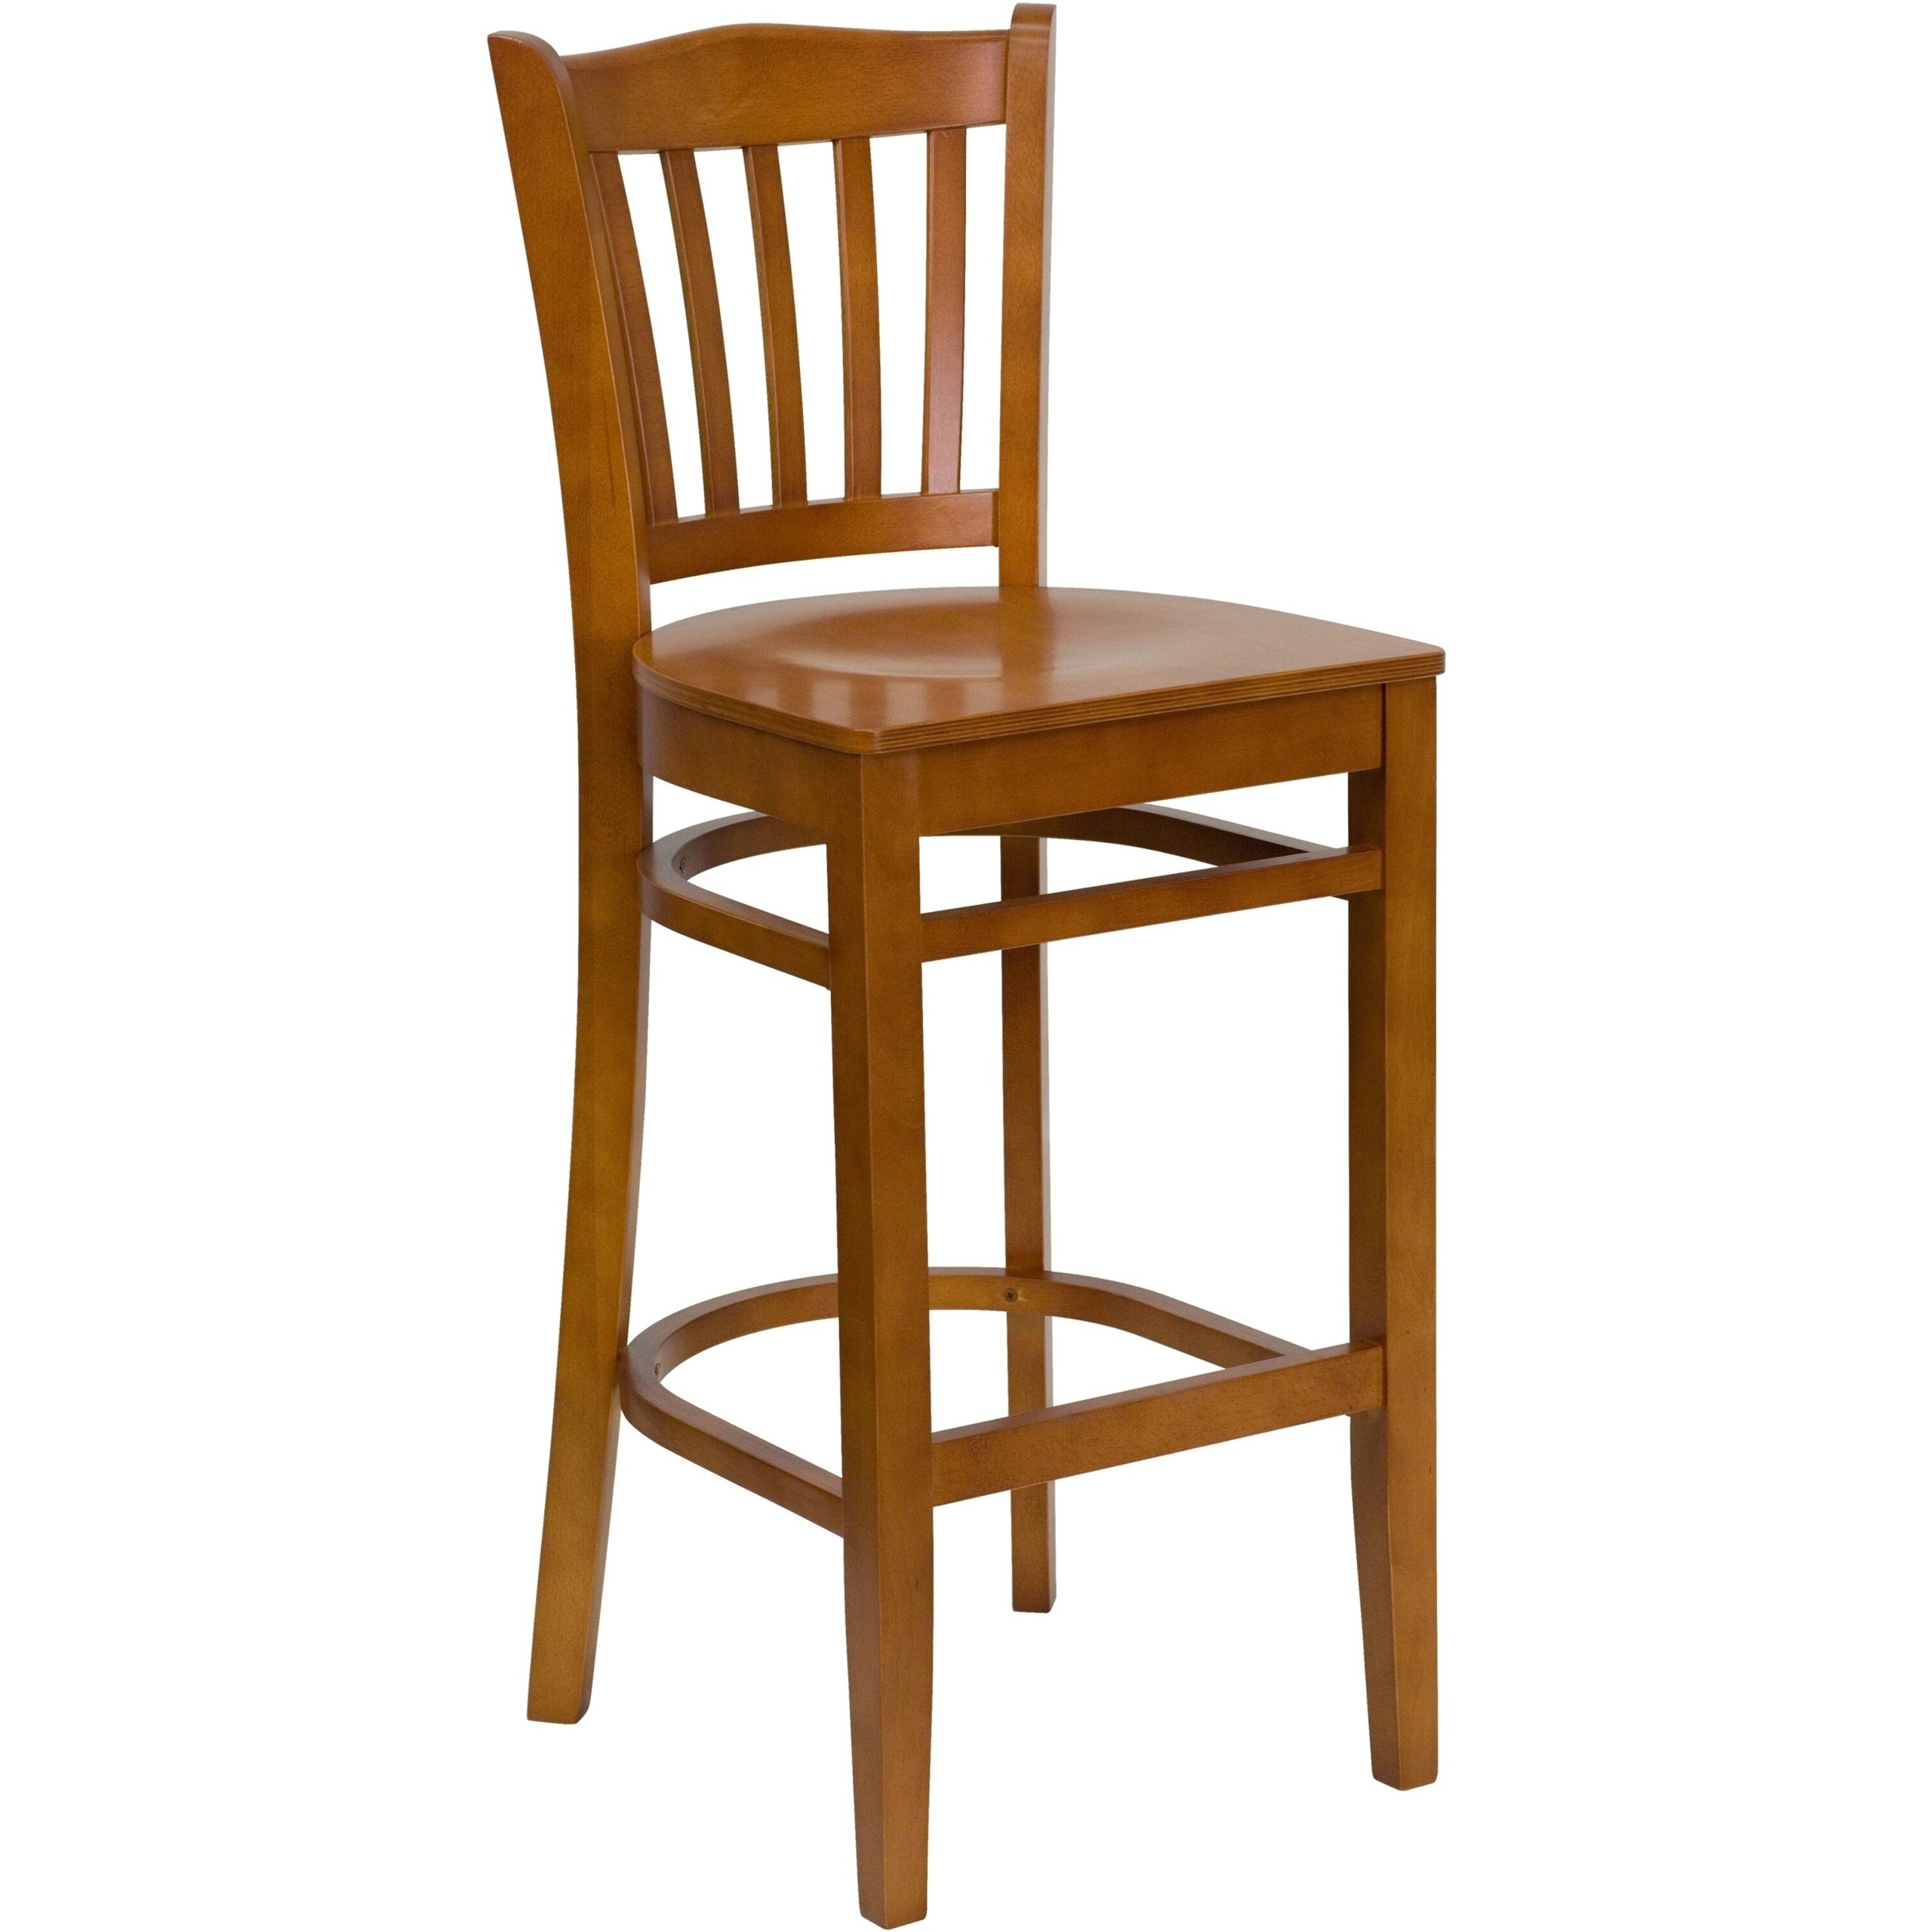 Wooden bar stools with backs 5